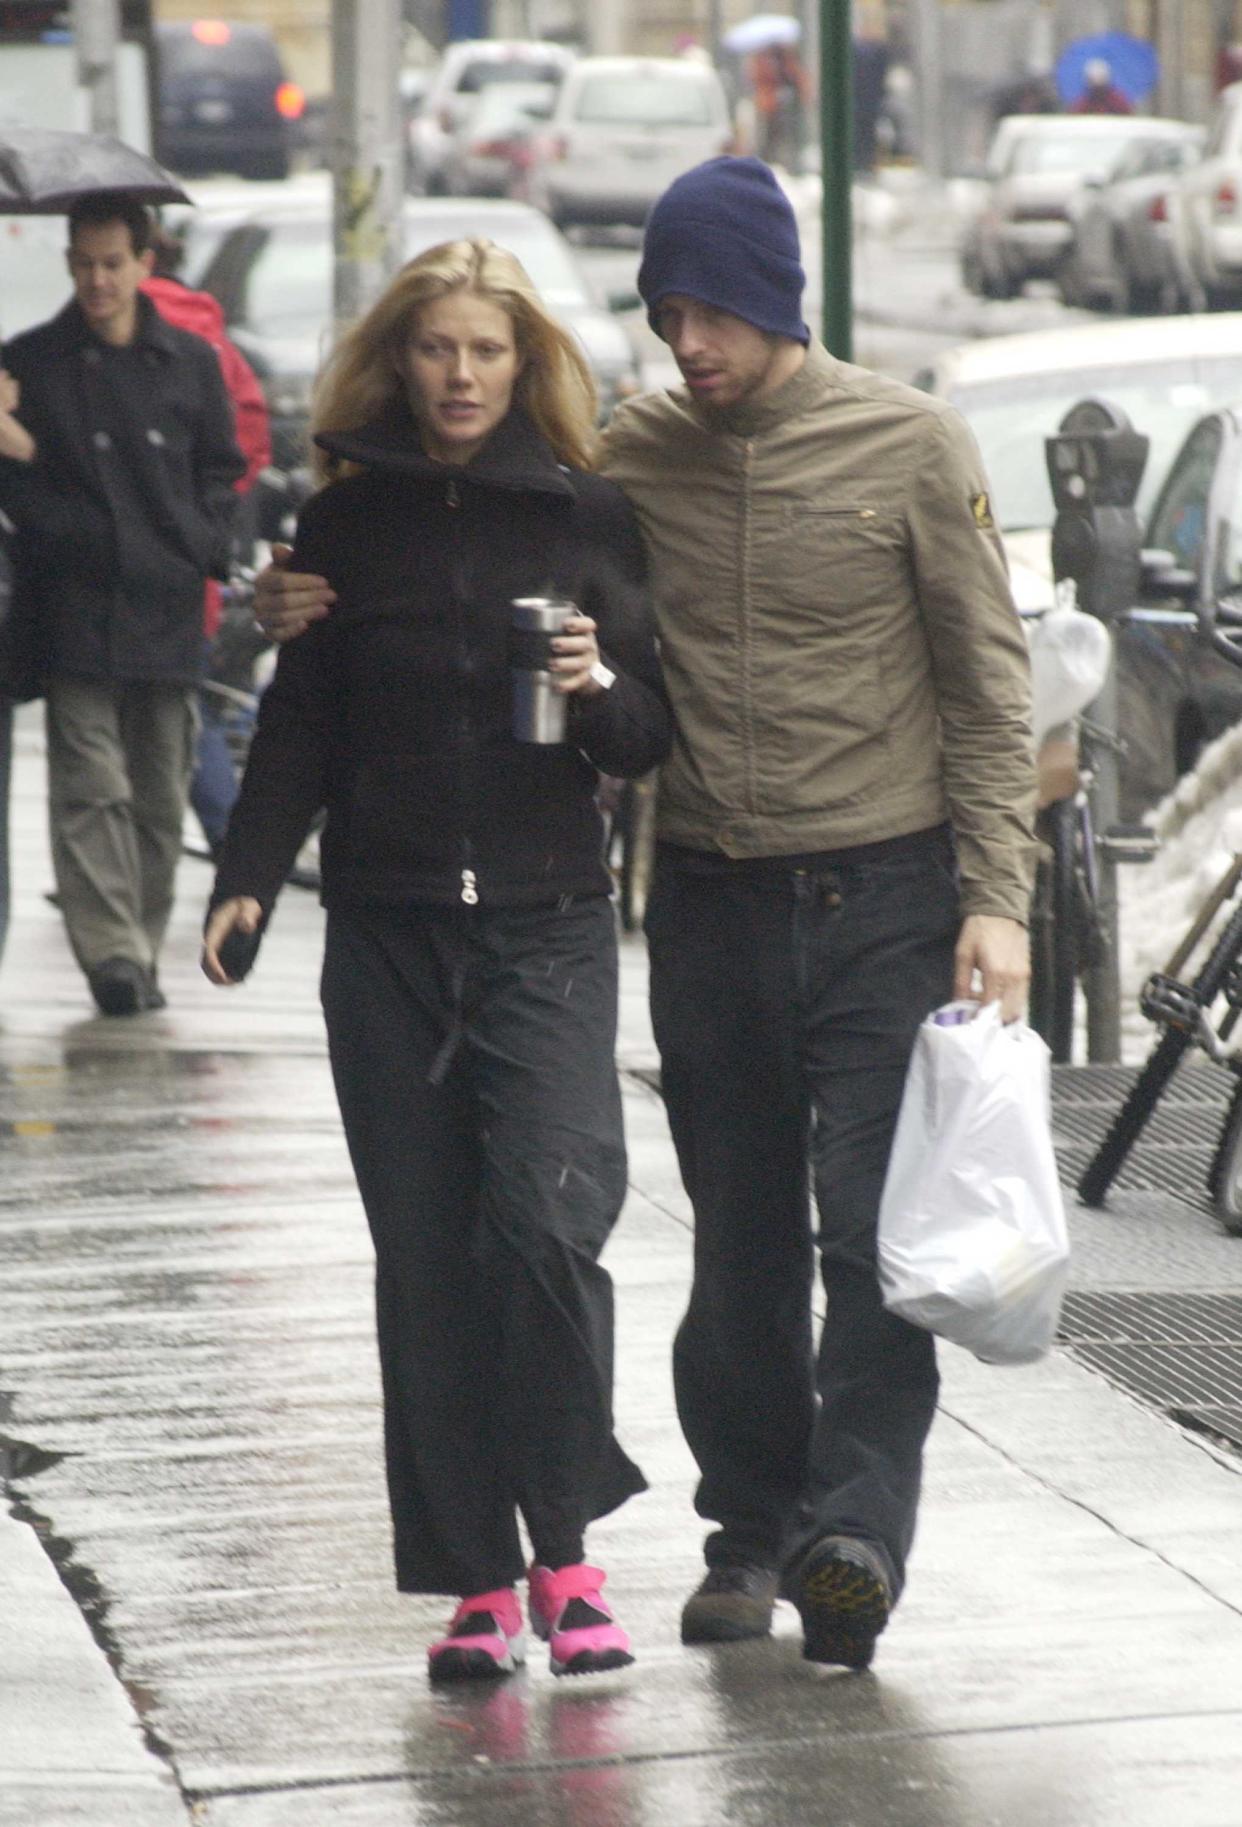 Gwyneth Paltrow and Chris Martin walking together in New York City.  